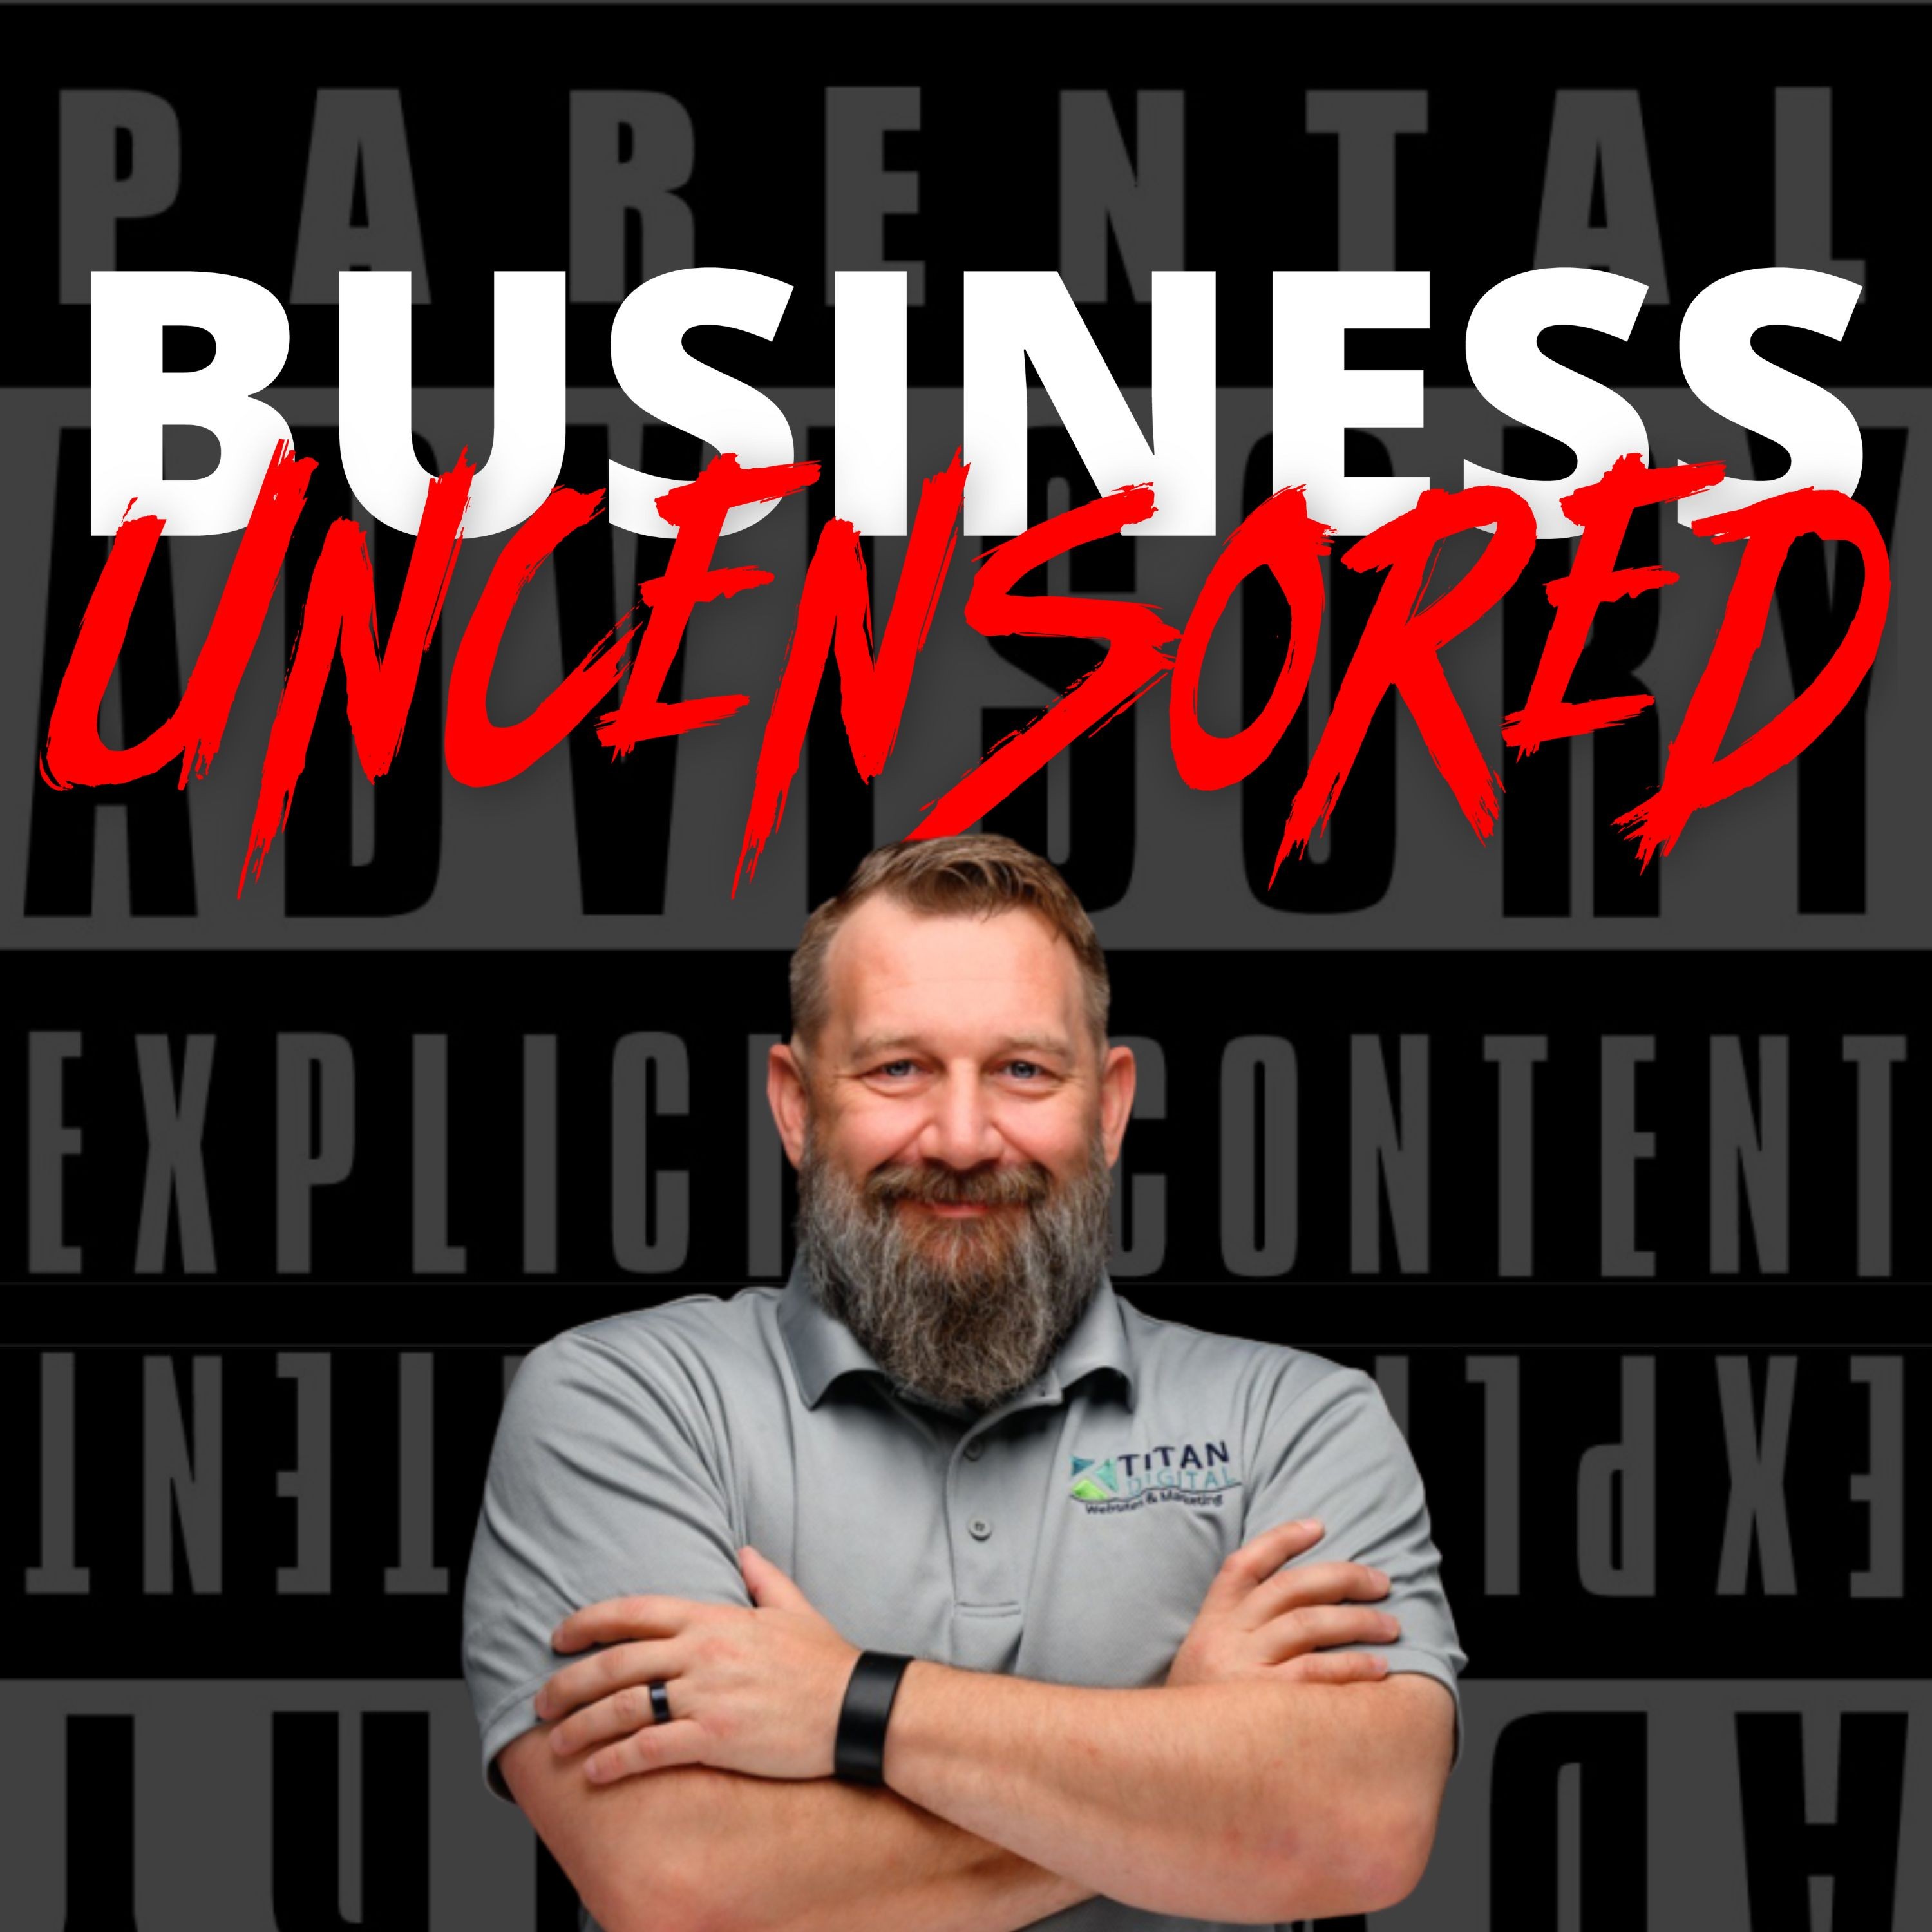 NOT TO USE Business Uncensored